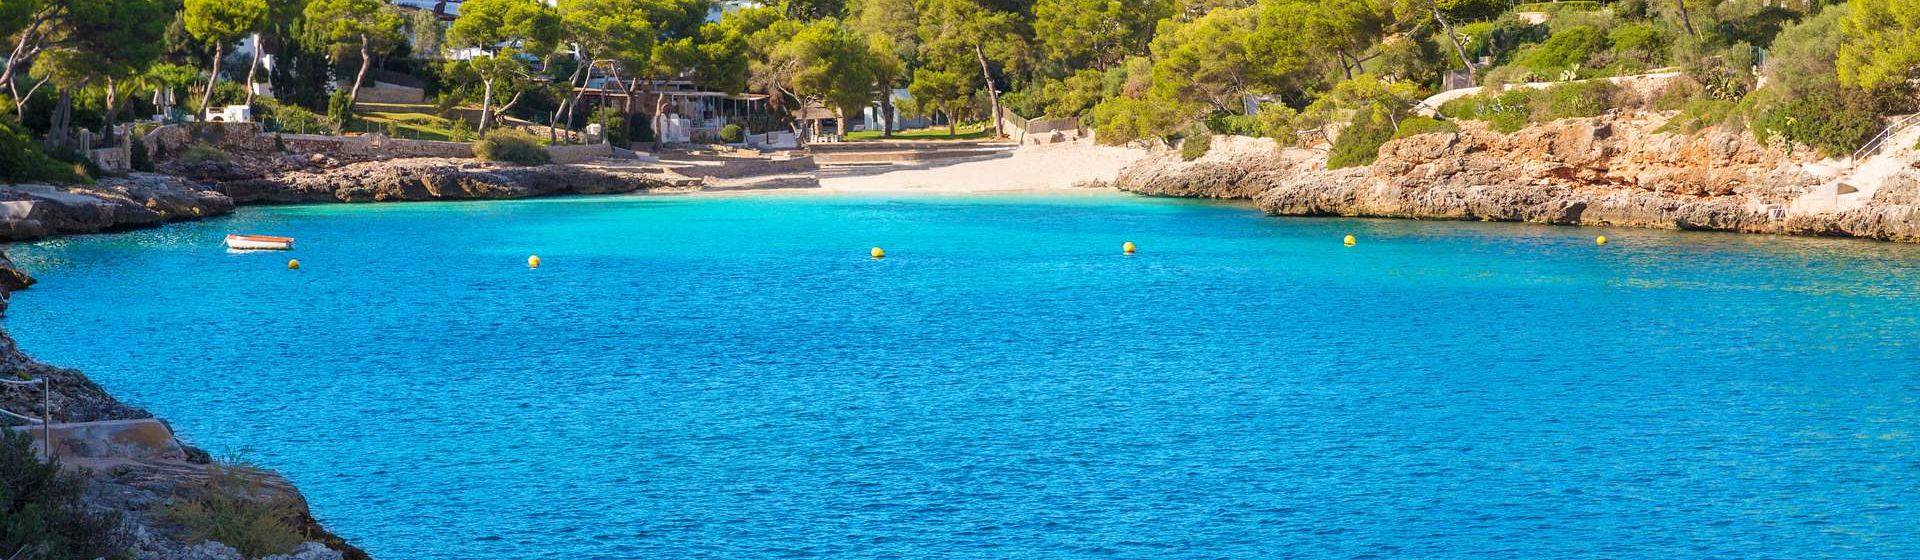 Holidays to Cala D'Or Image